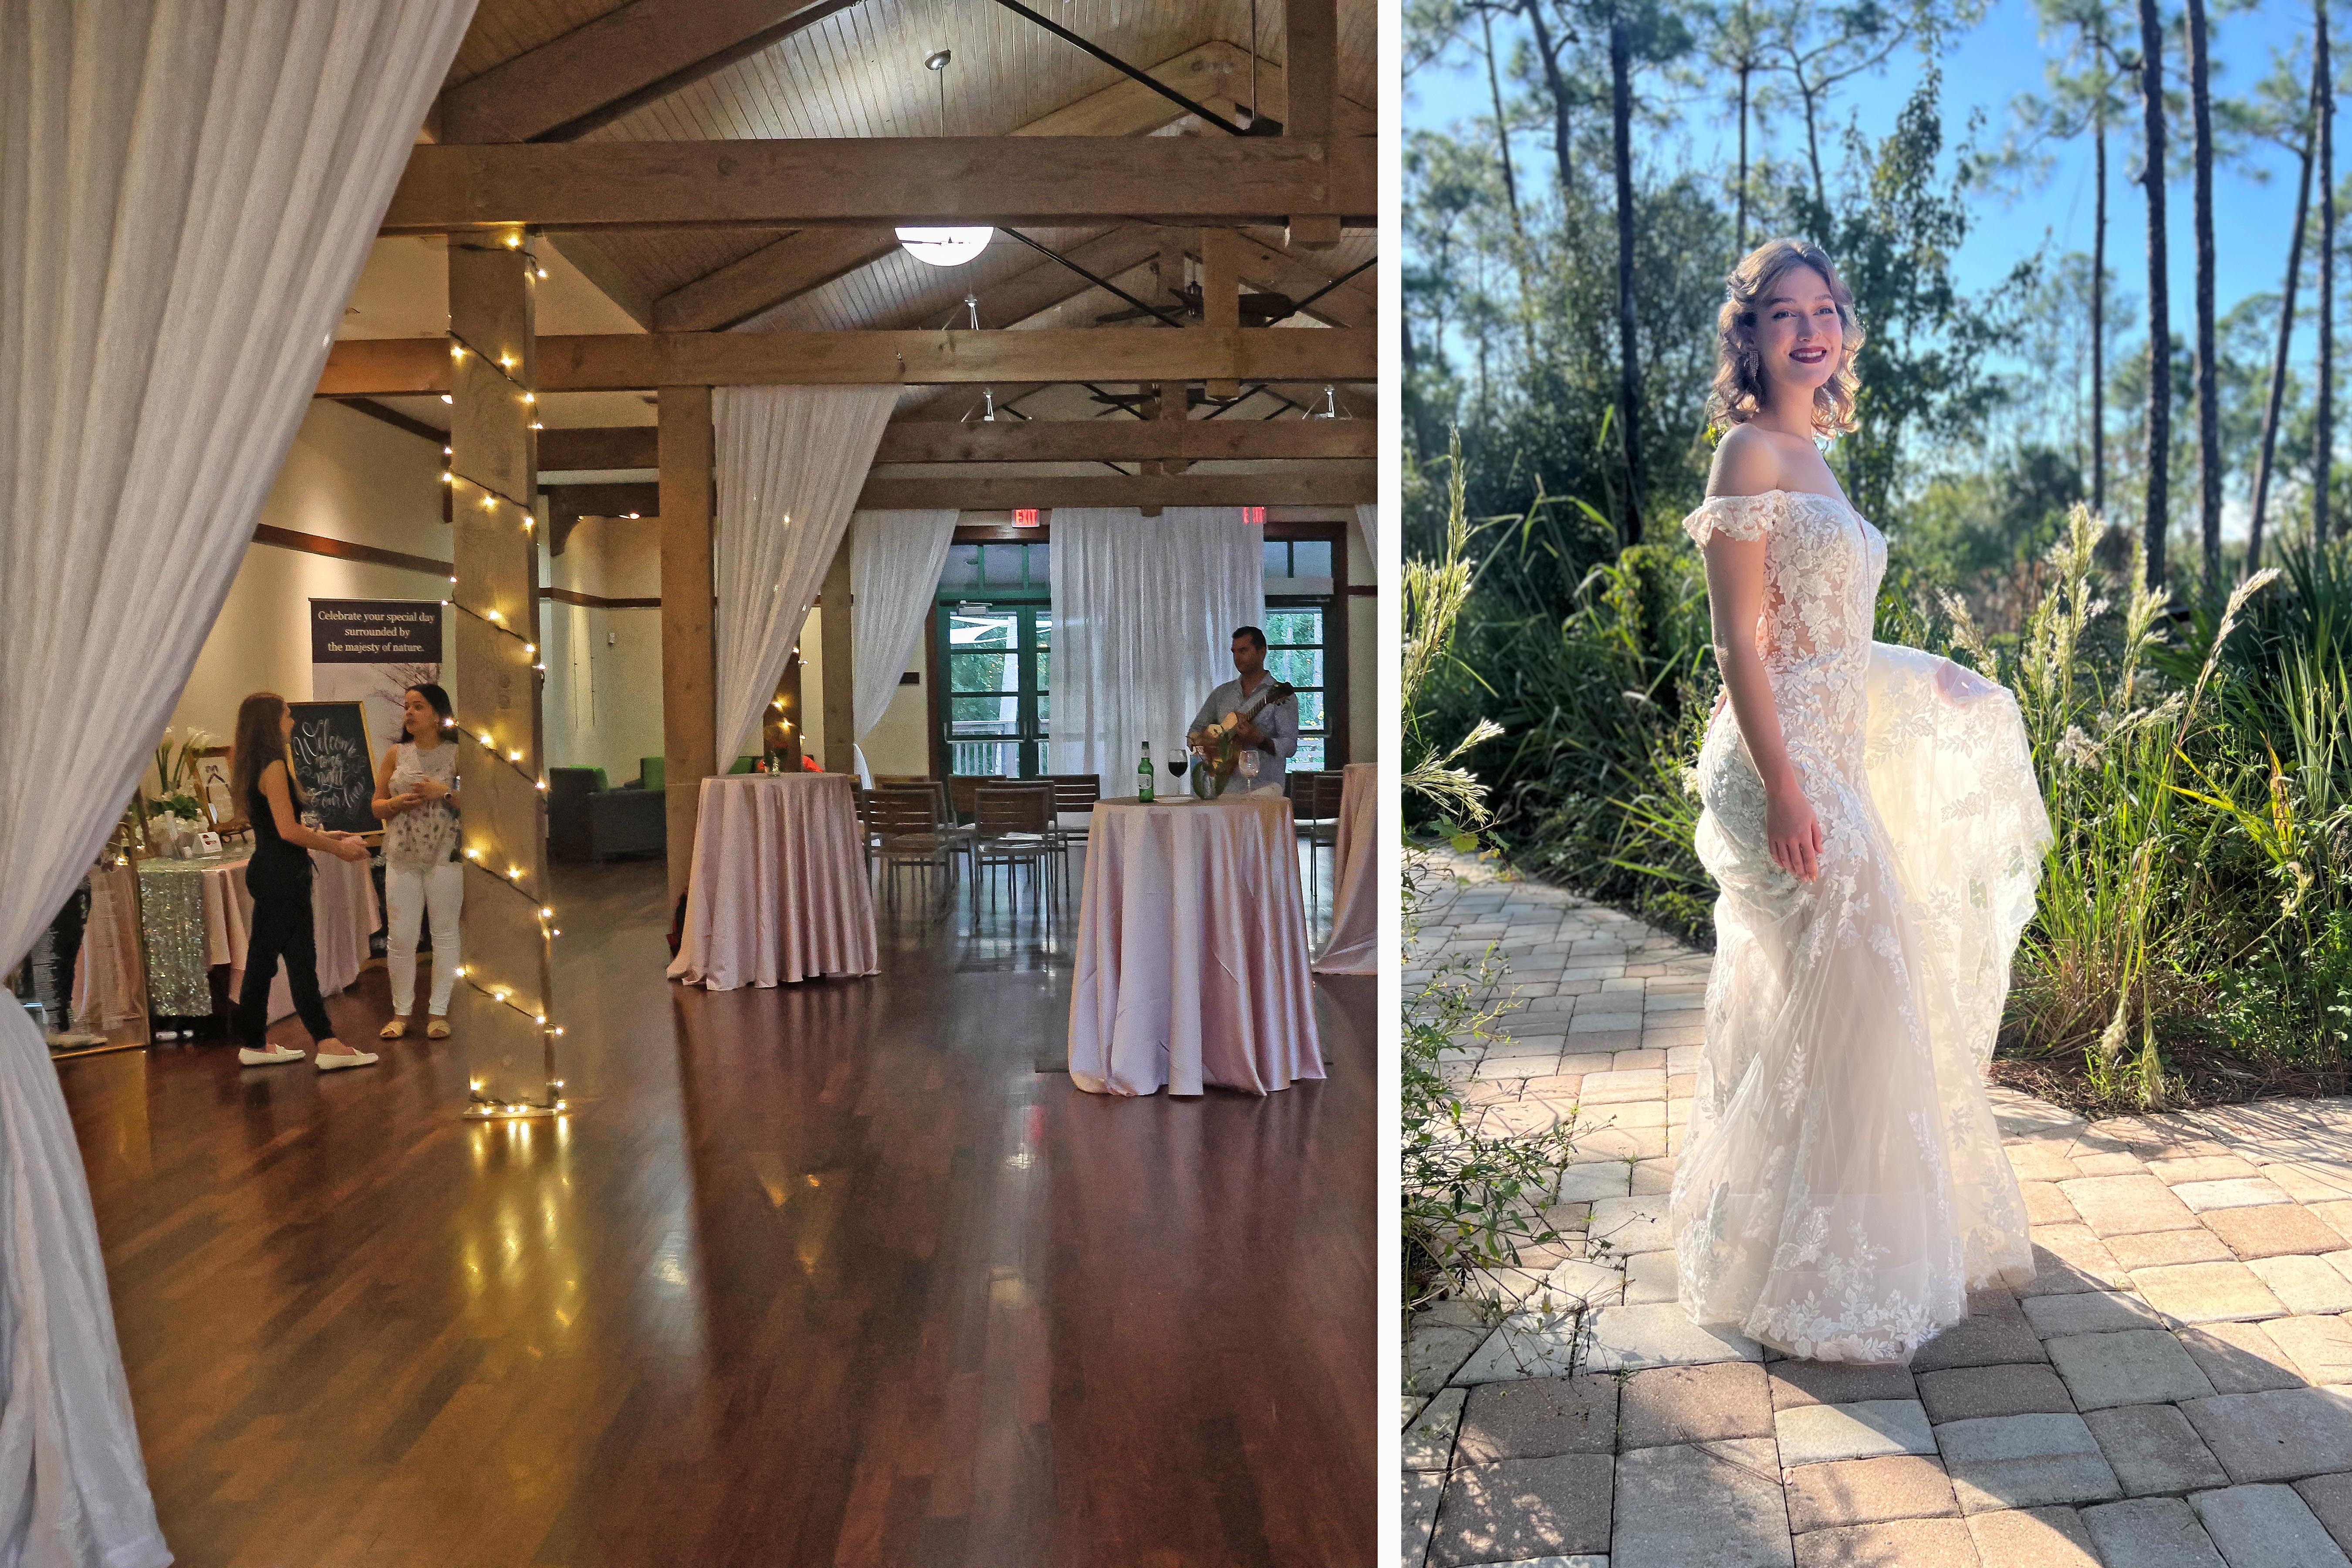 Split photo showing the venue space and a bride on the back patio.